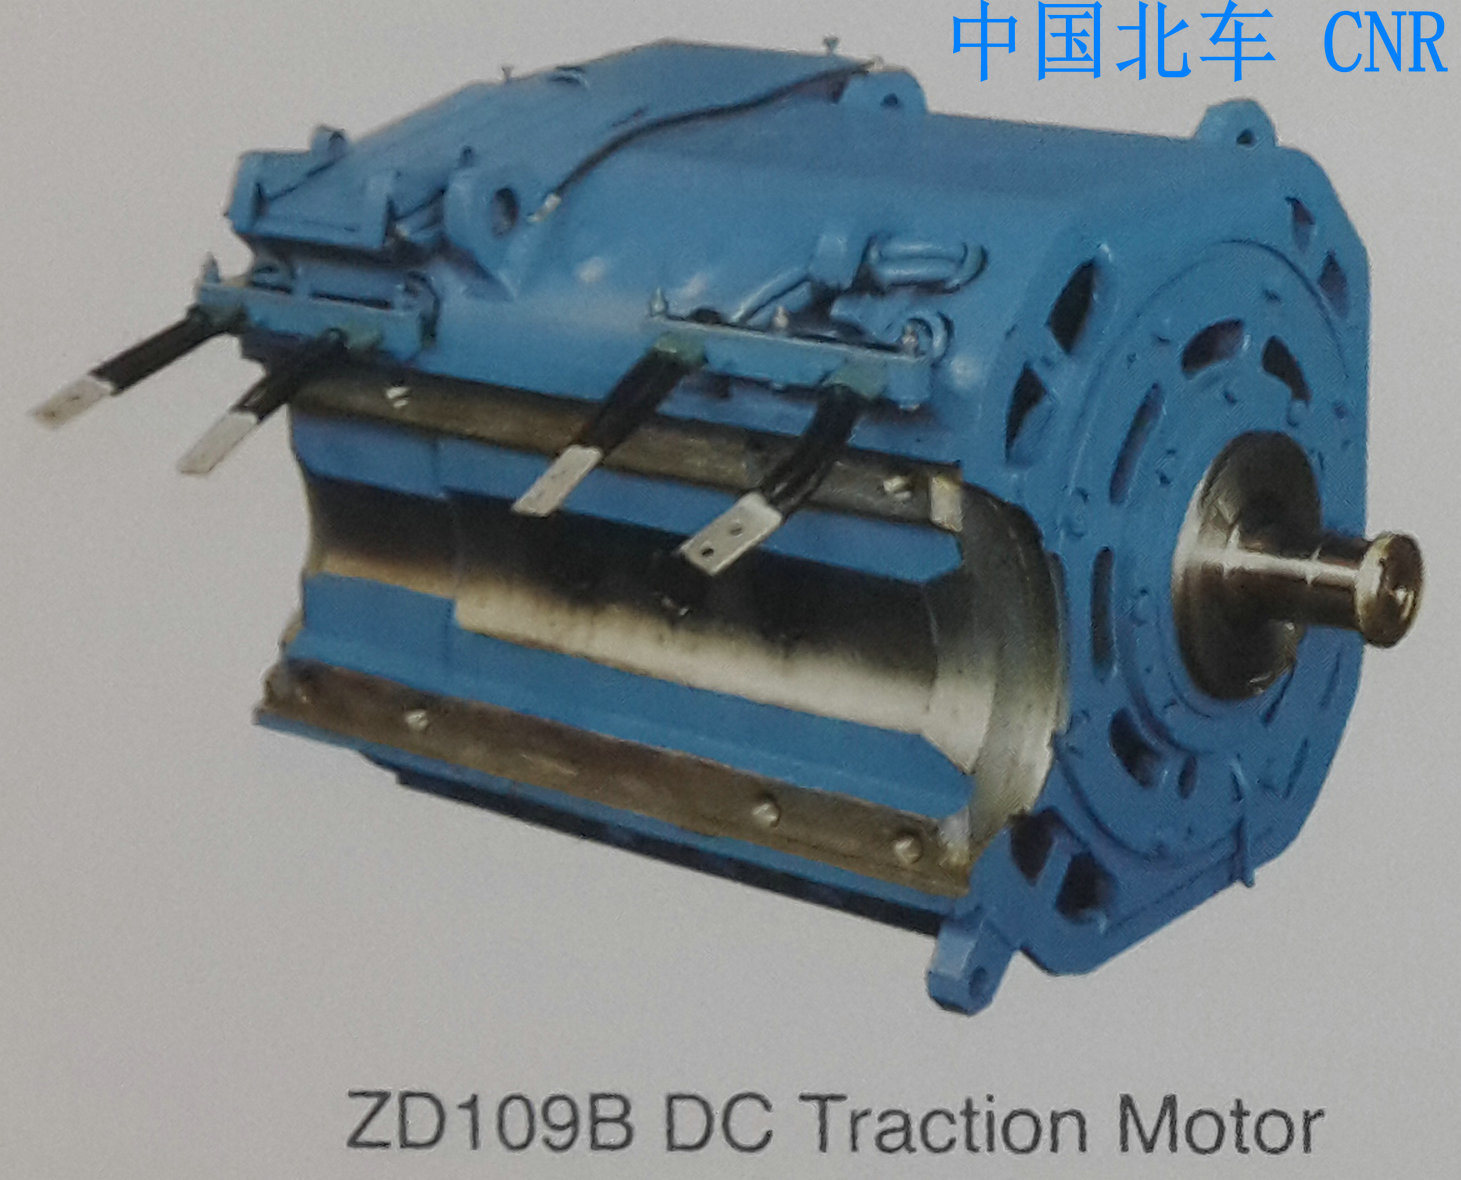 Zd109b DC Traction Motor